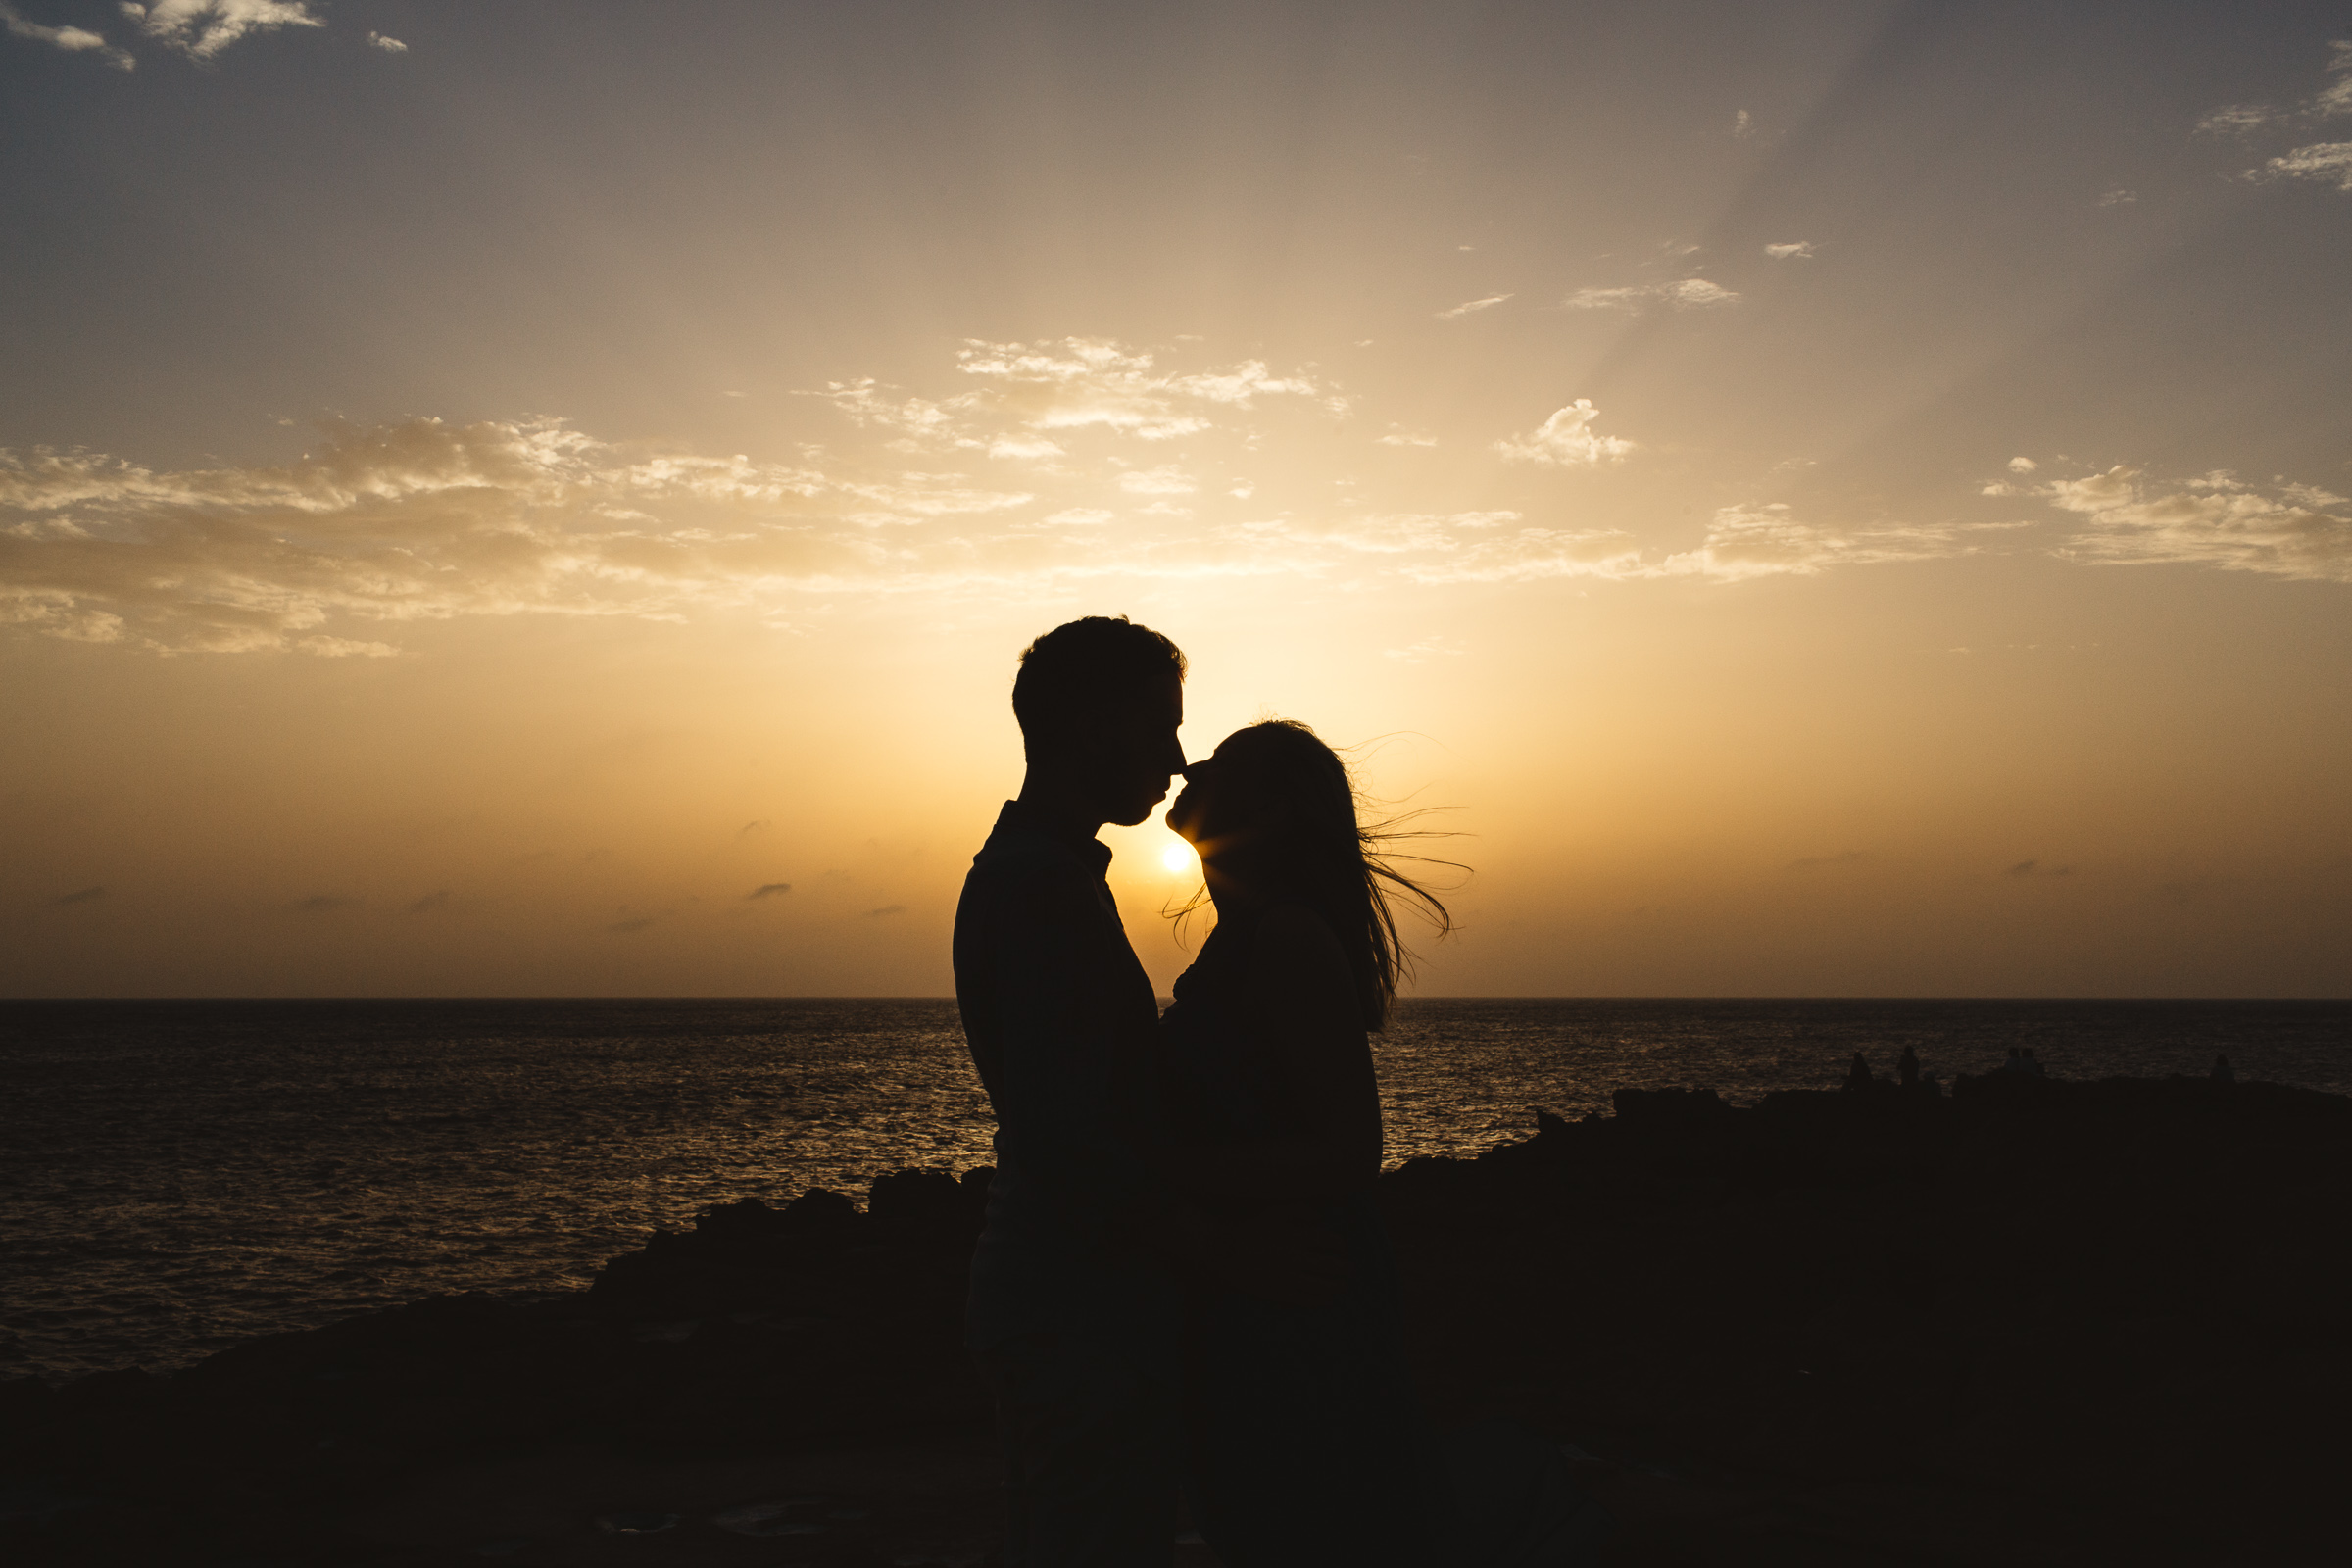 A silhouette sunset kiss in Gozo.